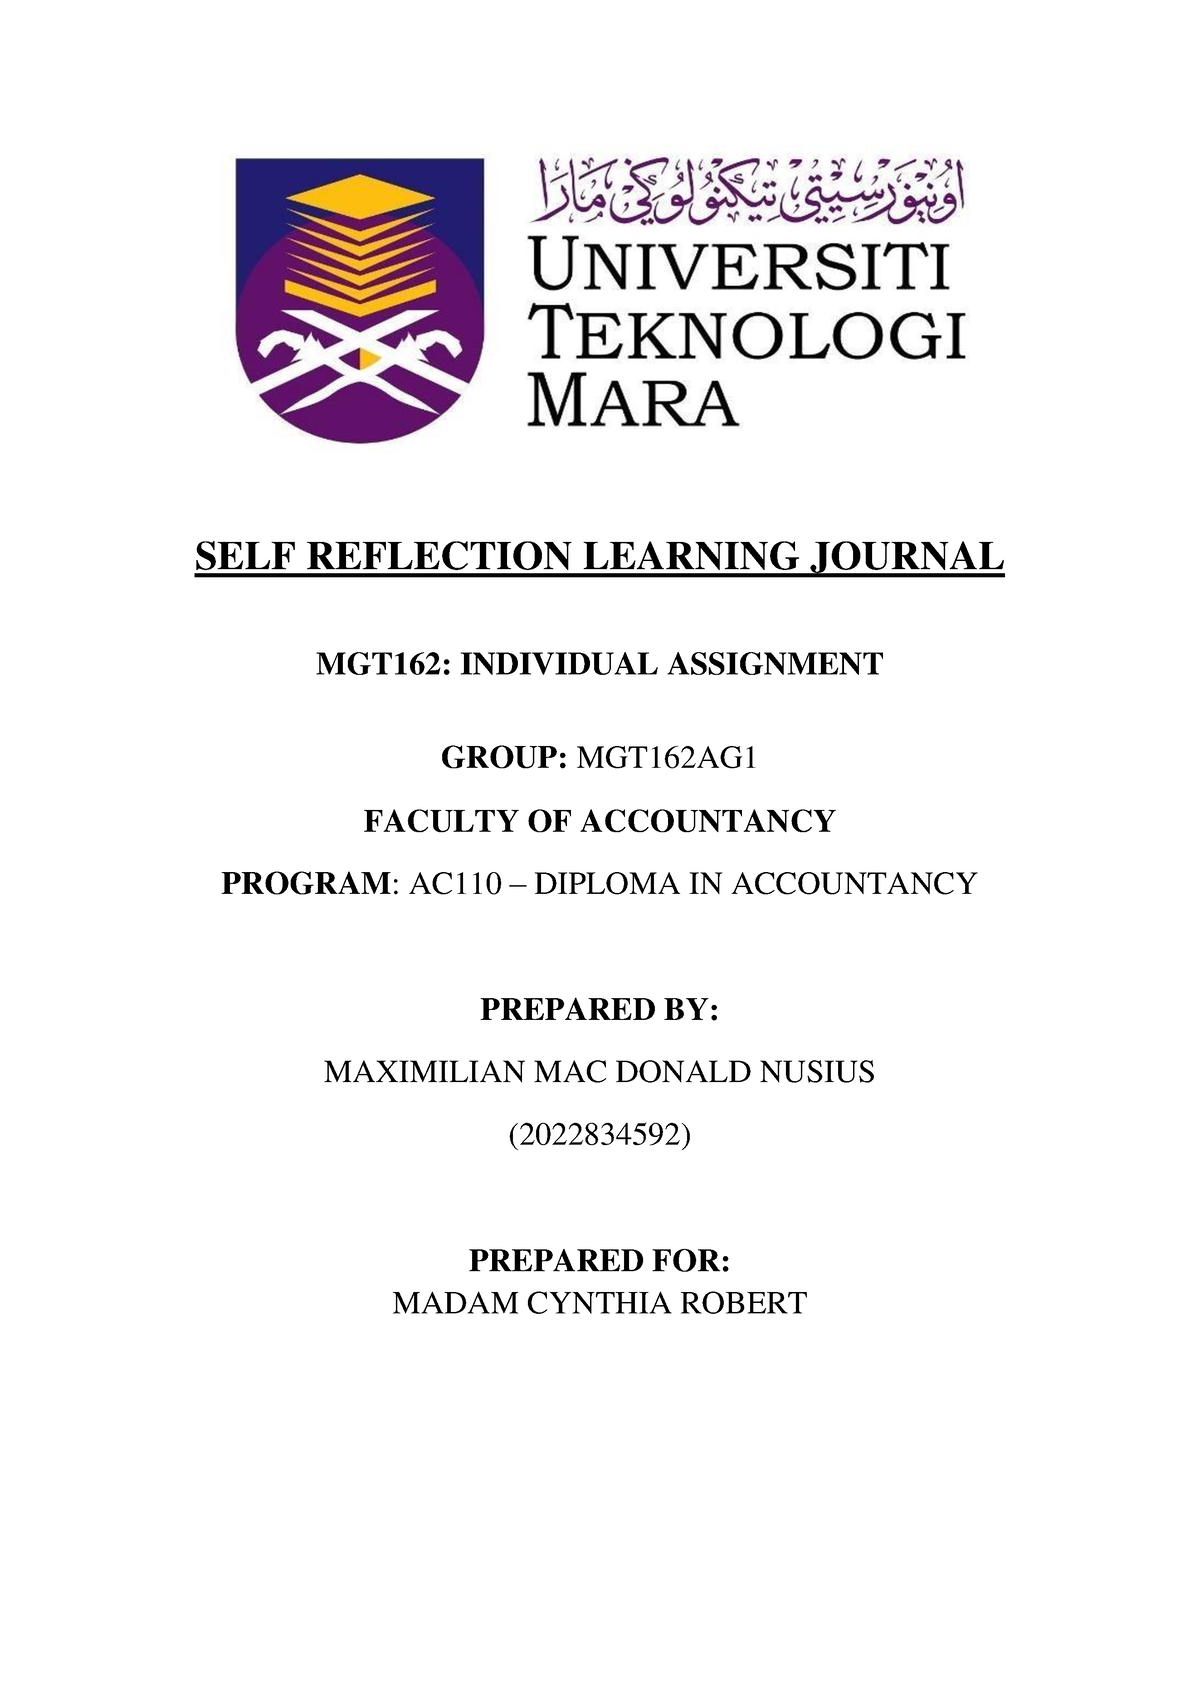 mgt 162 individual assignment self reflection journal